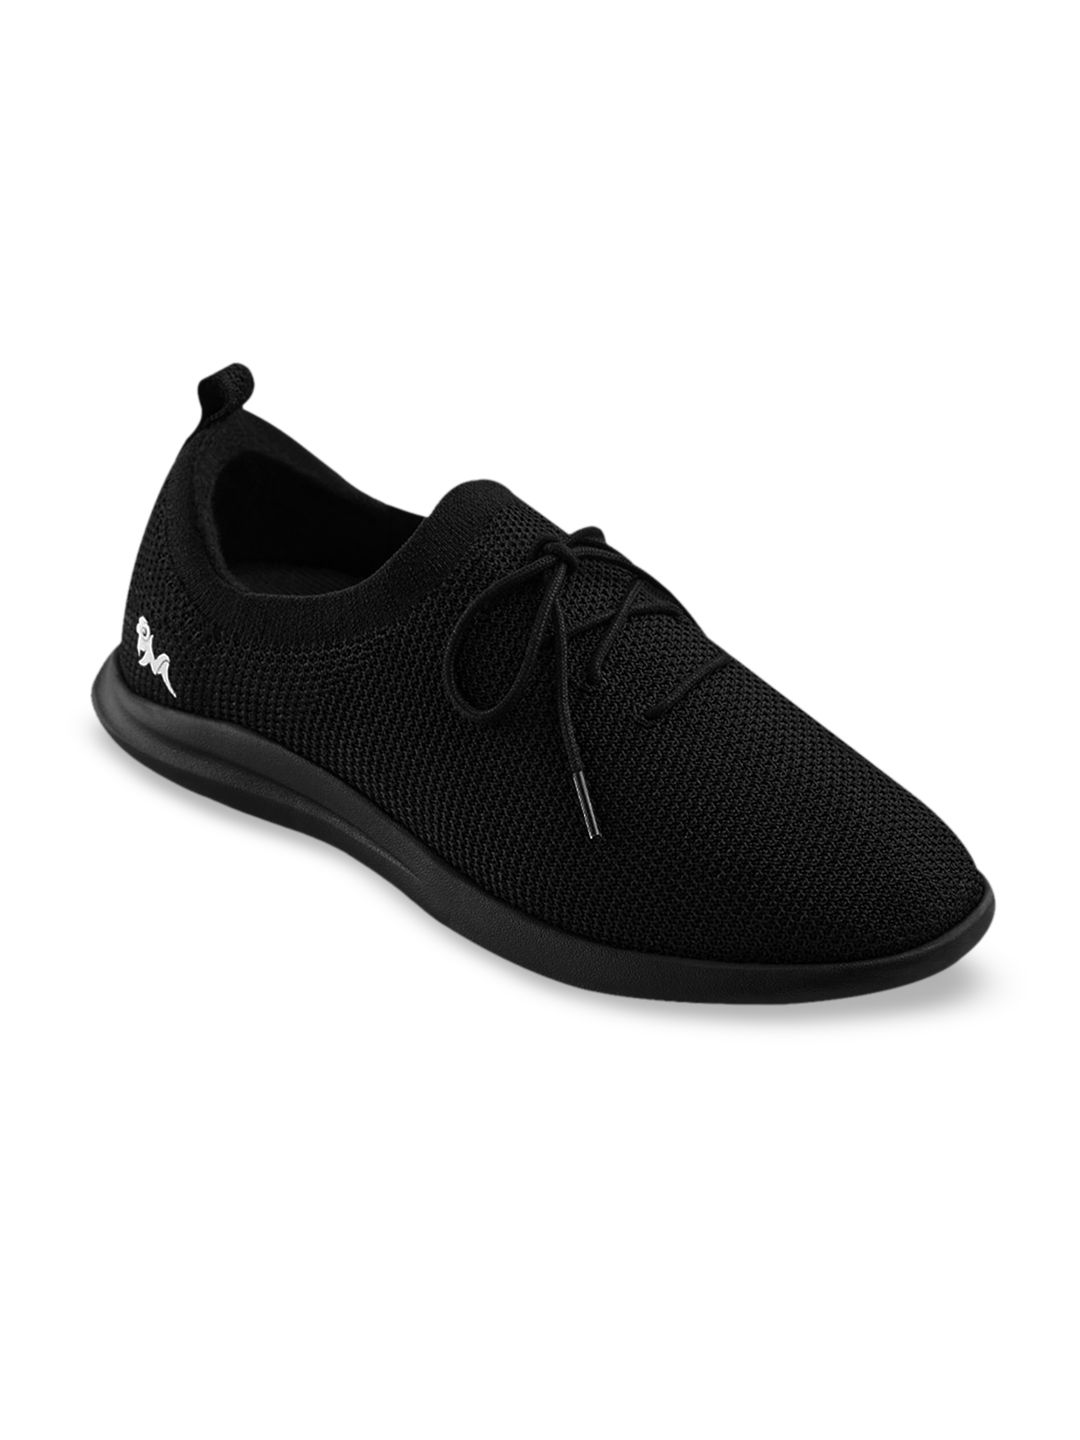 NEEMANS Unisex Black Re-Live Knit Sneakers Price in India